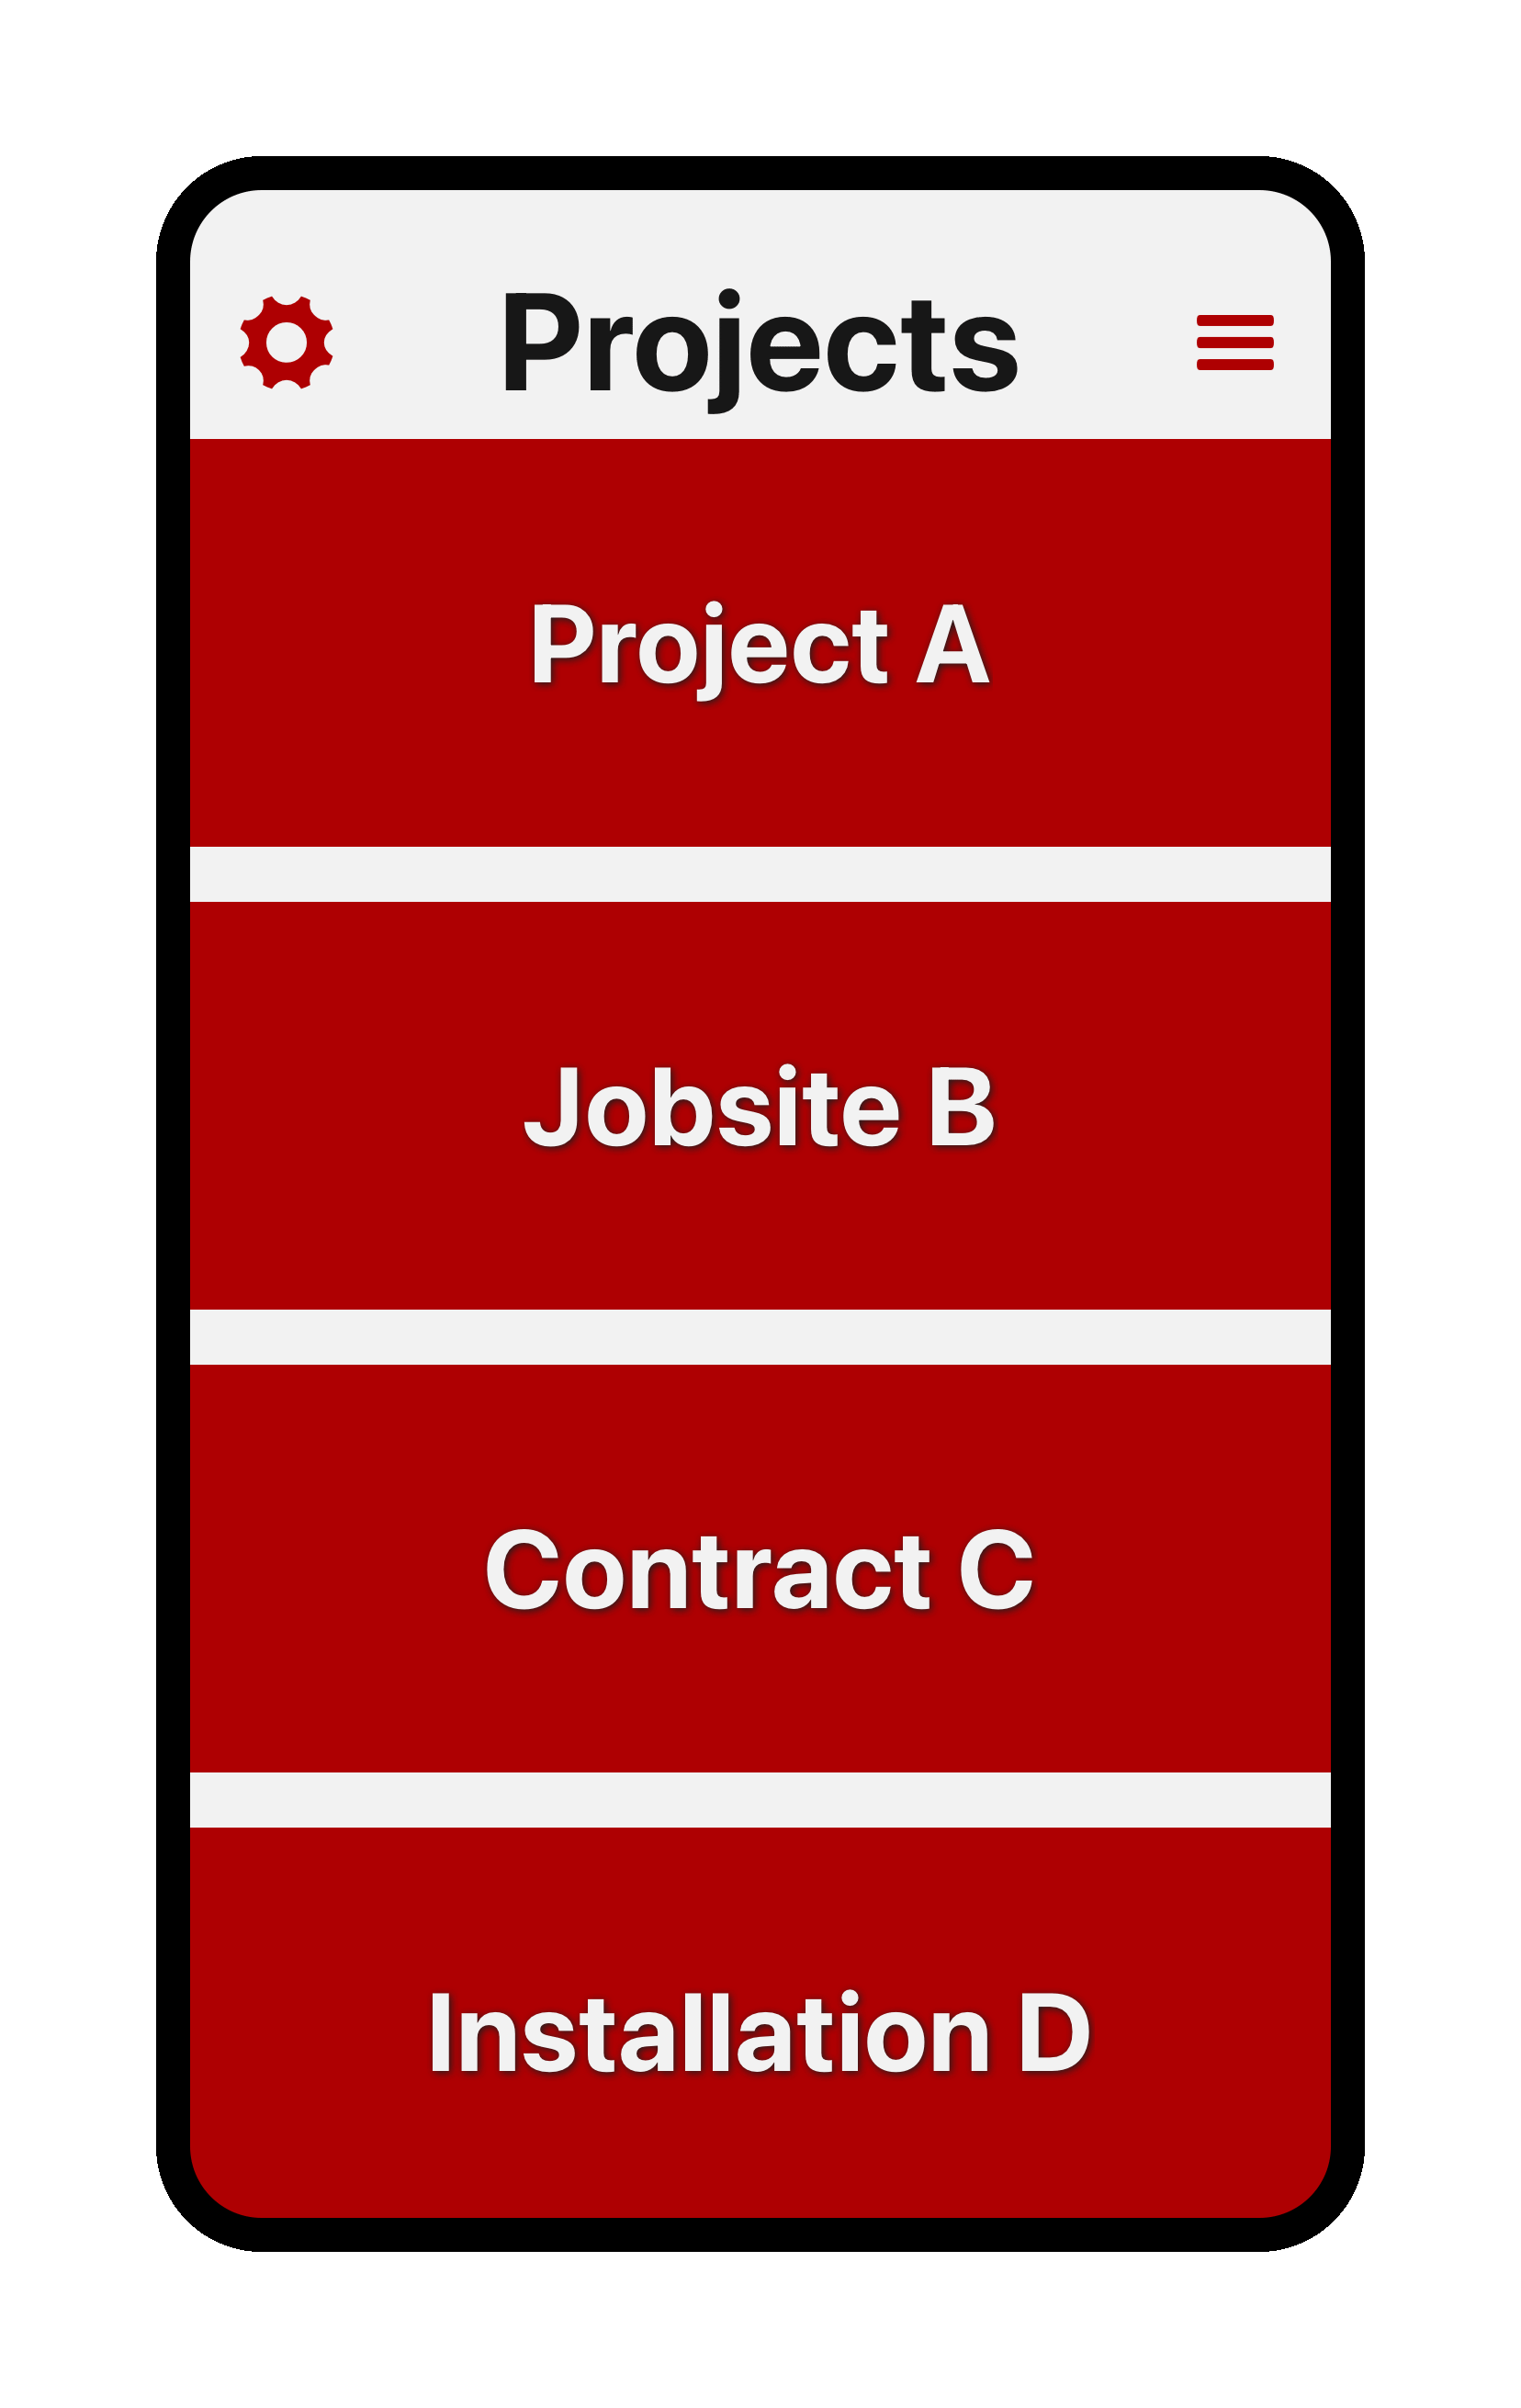 Screenshot of list of projects in the Tímavera app. Each project is a big red button. Projects shown are Project A, Jobsite B, Contract C. In the upper left corner is a cog icon that shows the settings screen. In the upper right corner is a triple equals icon that shows employees their time entries.